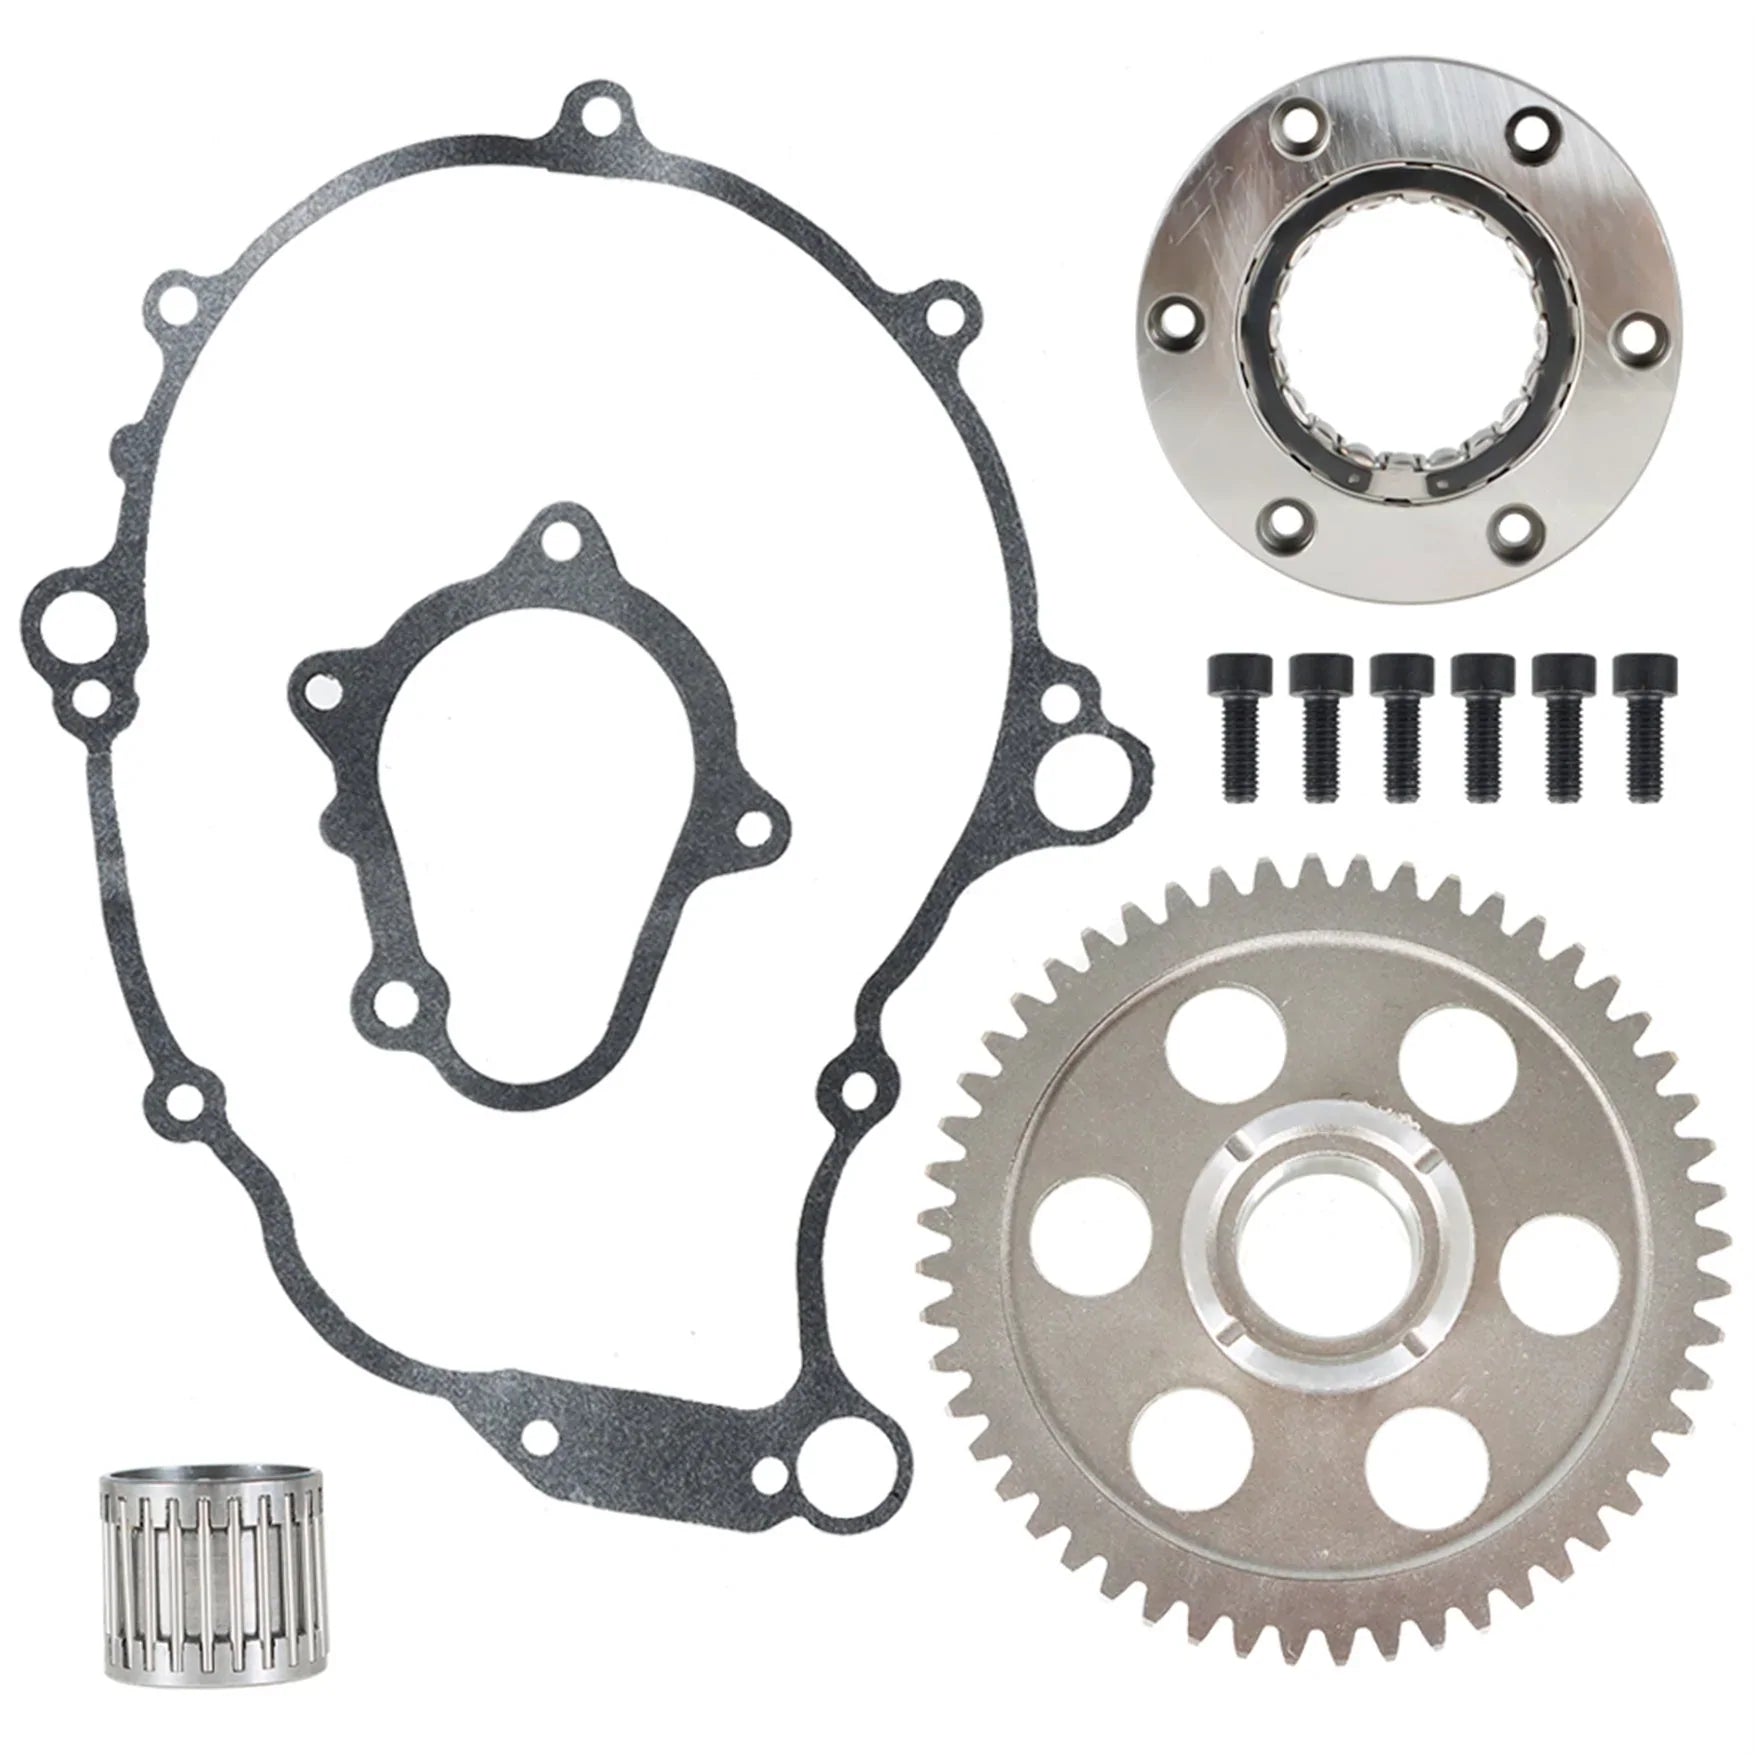 labwork Heavy Duty One Way Bearing Starter Clutch Gear Kit Replacement for Yamaha Raptor 660 2001-2003 LAB WORK MOTO